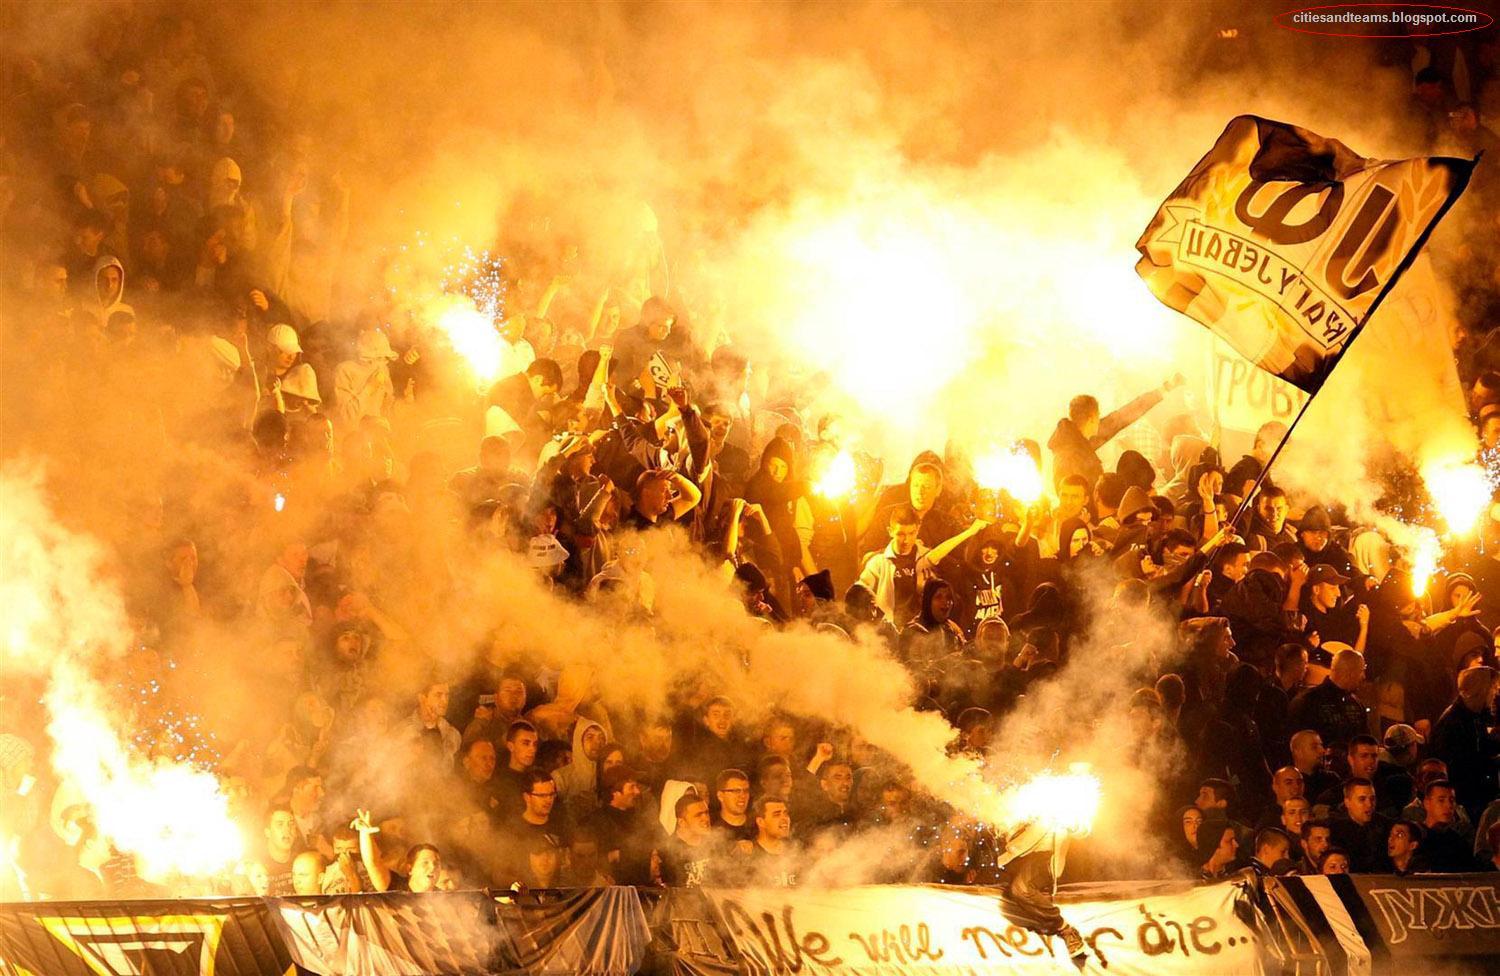 Partizan Fans In Serbian Derby With Red Star Belgrade C.a.T